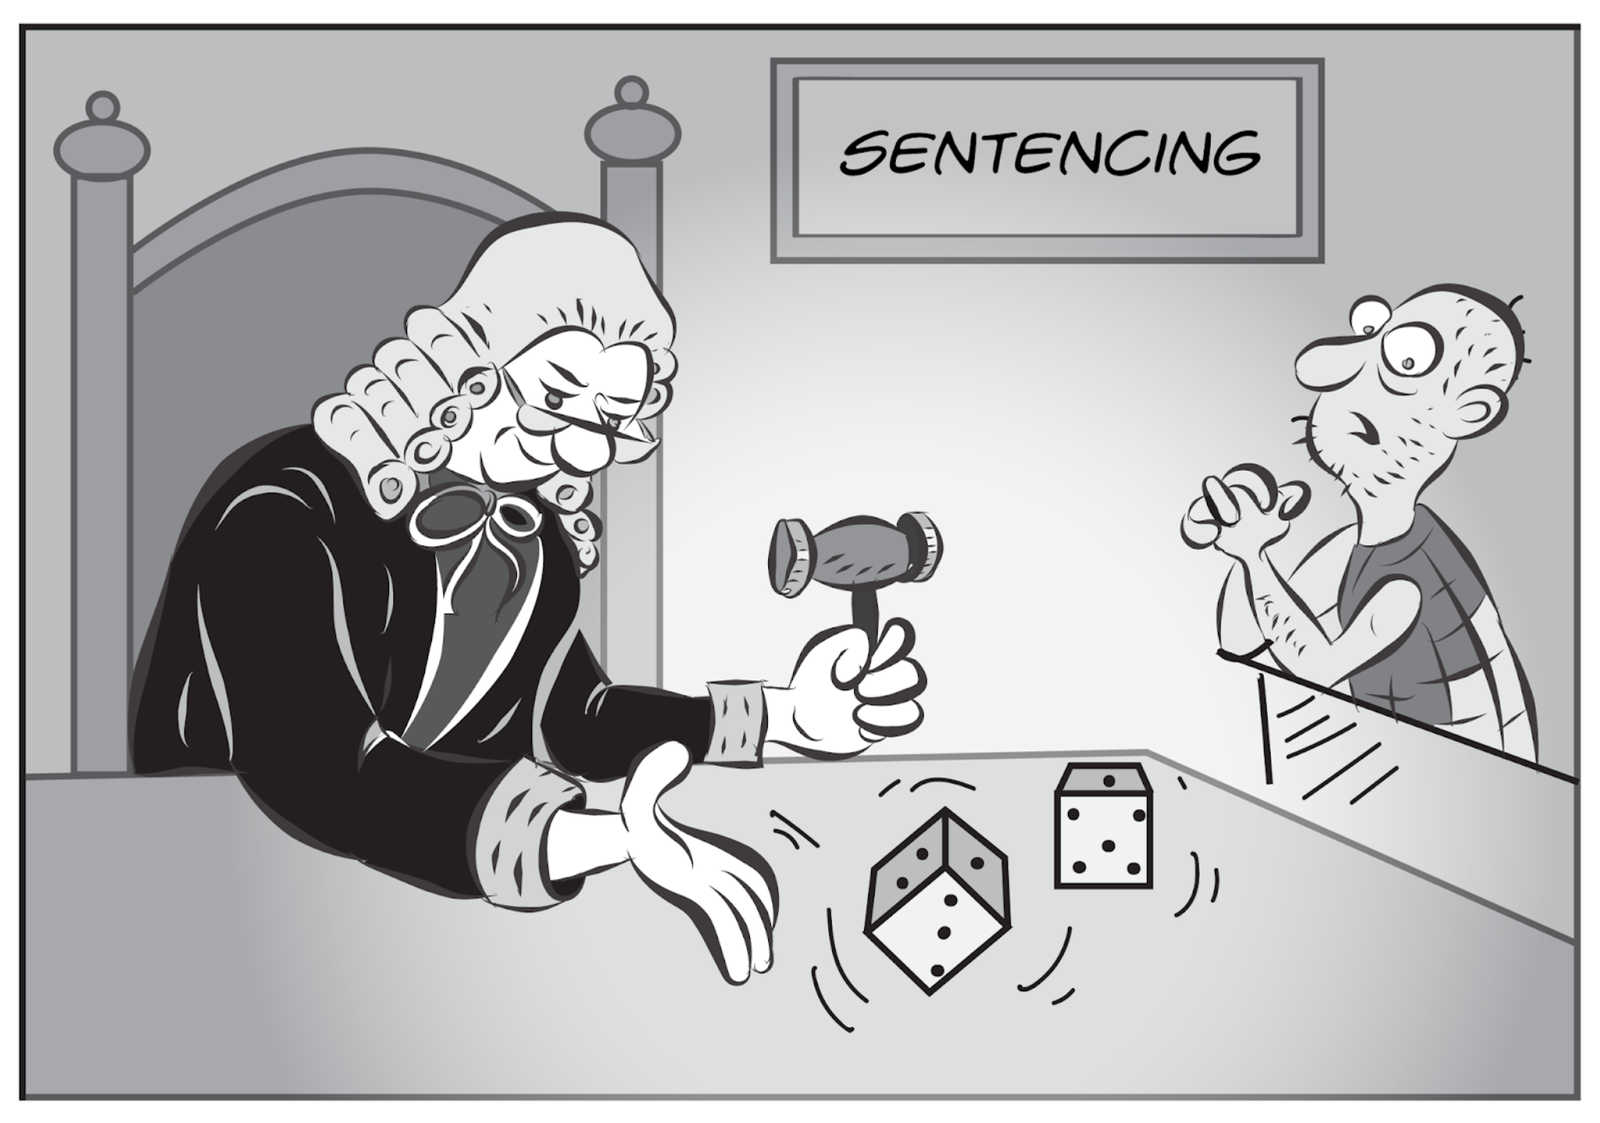 Judges should not play with dice